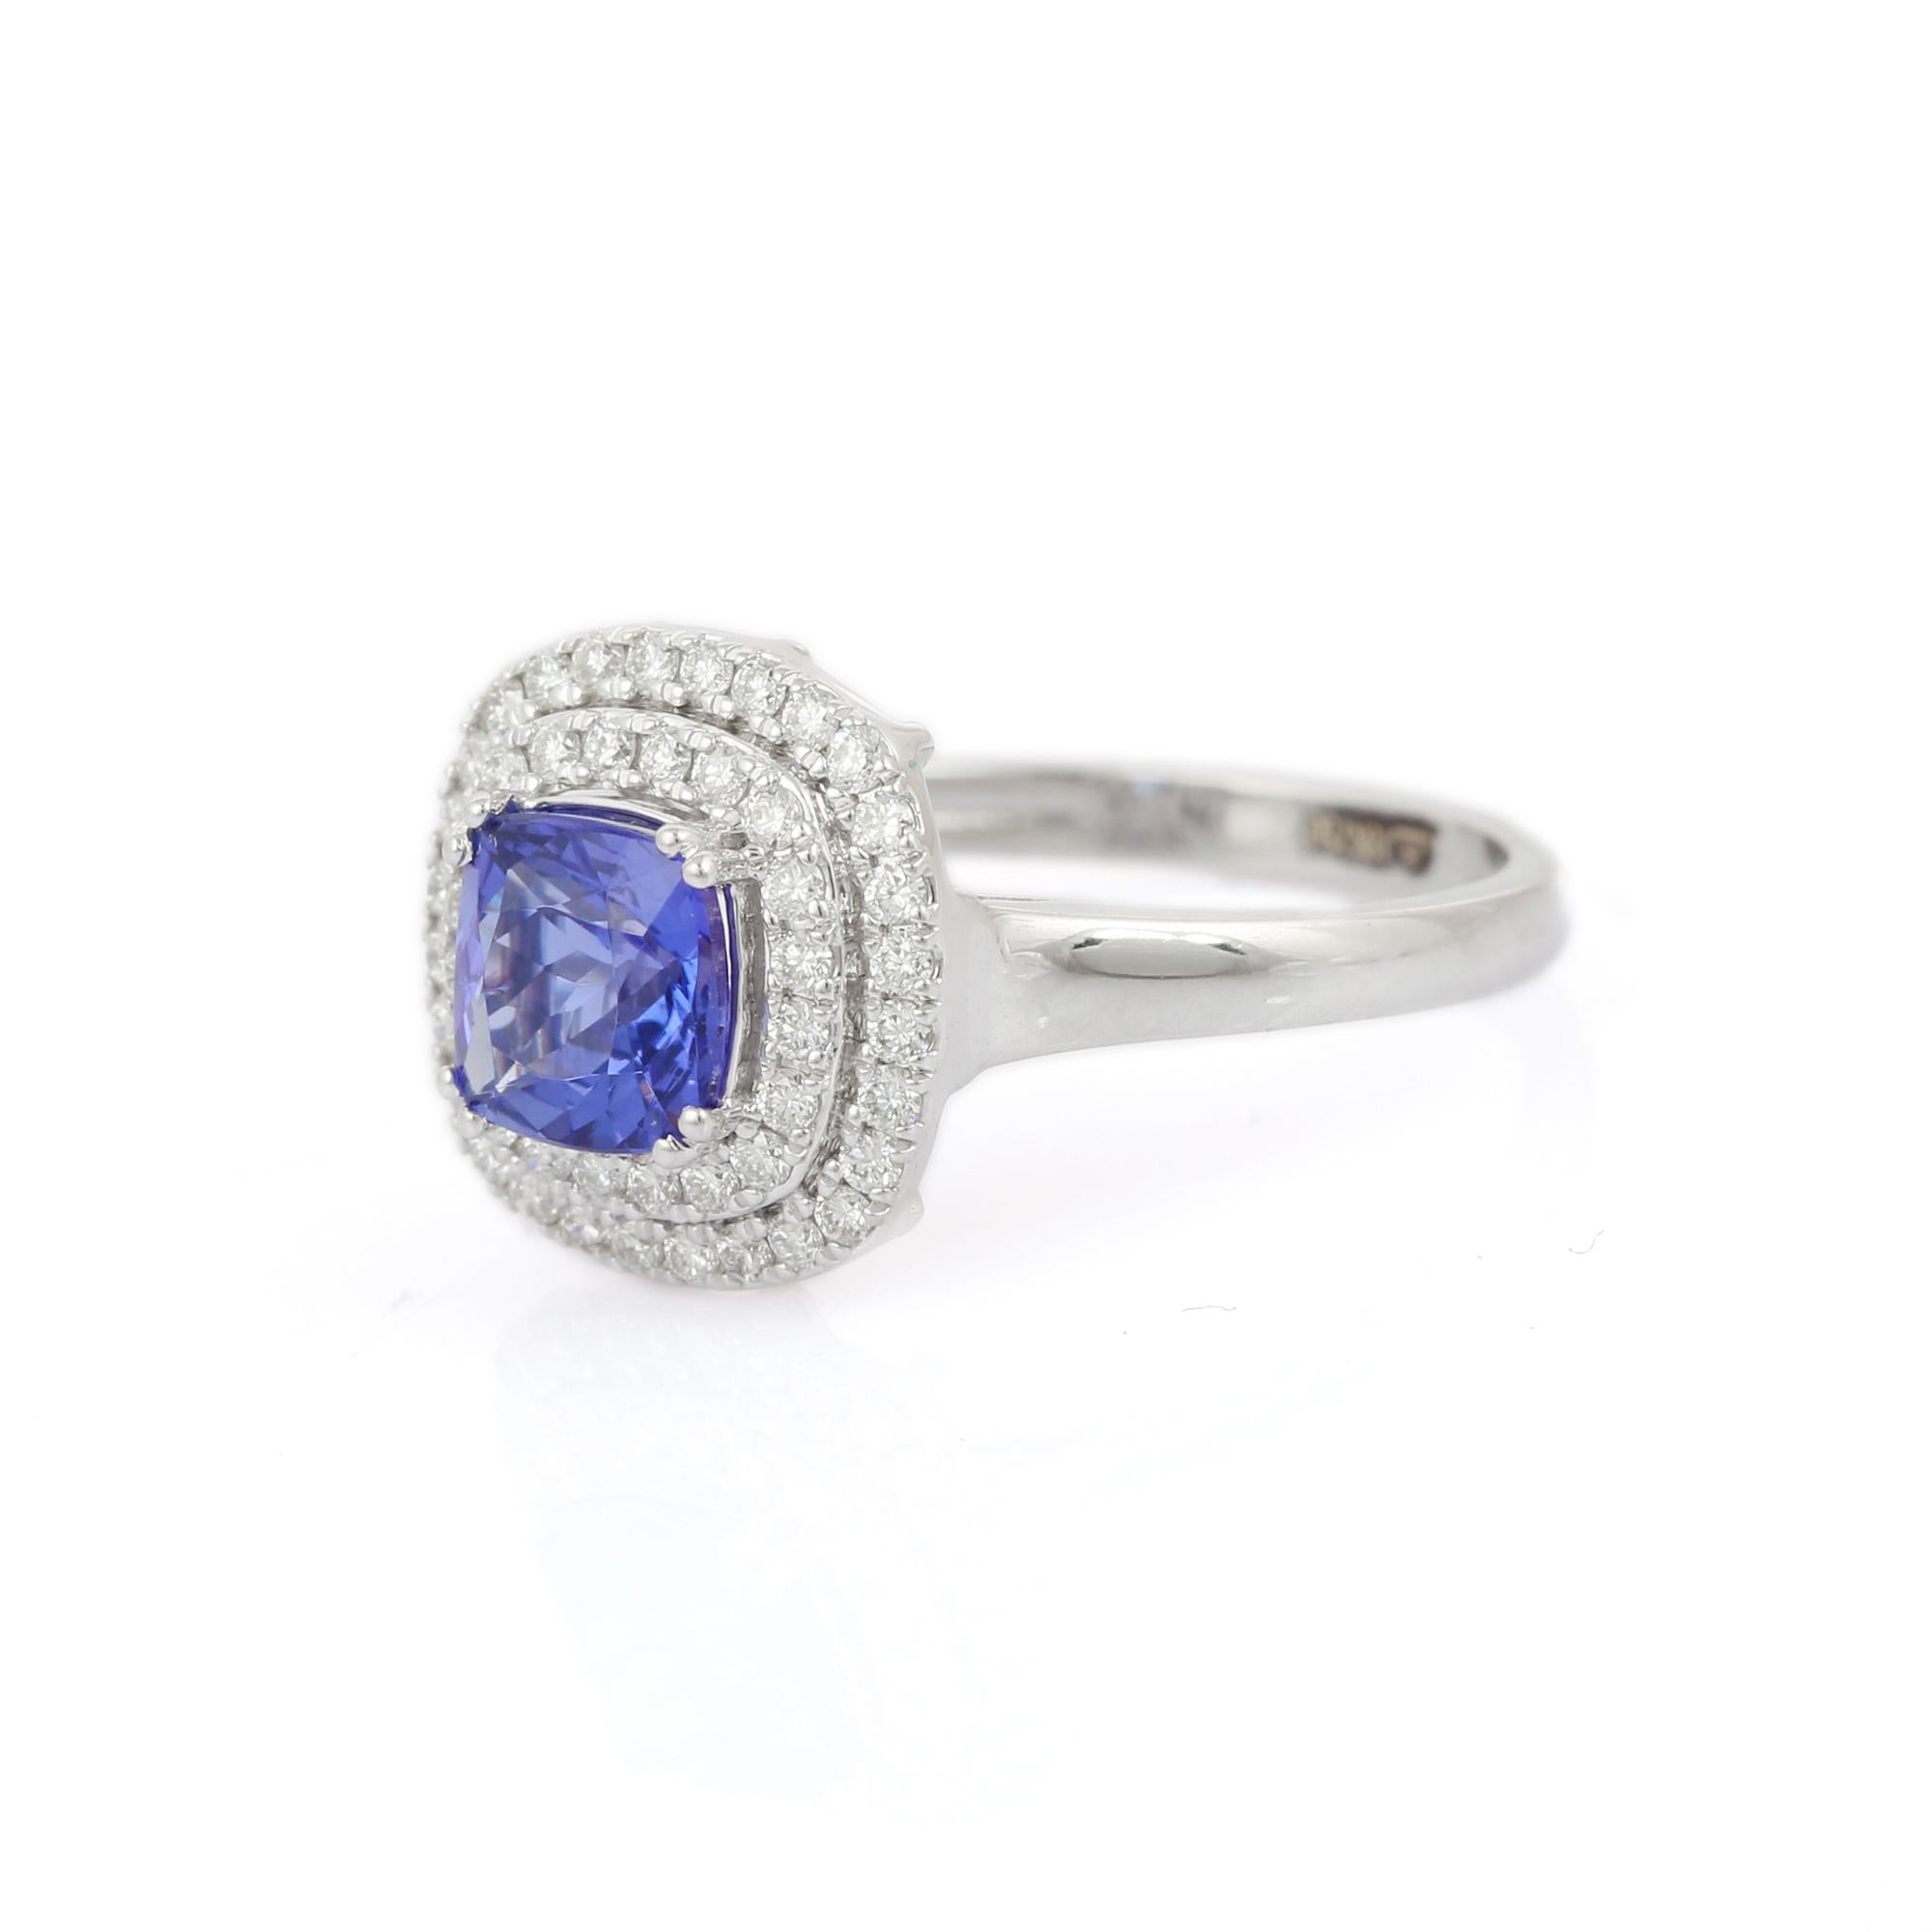 For Sale:  18k Solid White Gold Cushion Cut 1.2 Ct Tanzanite Diamond Ring for Women 2